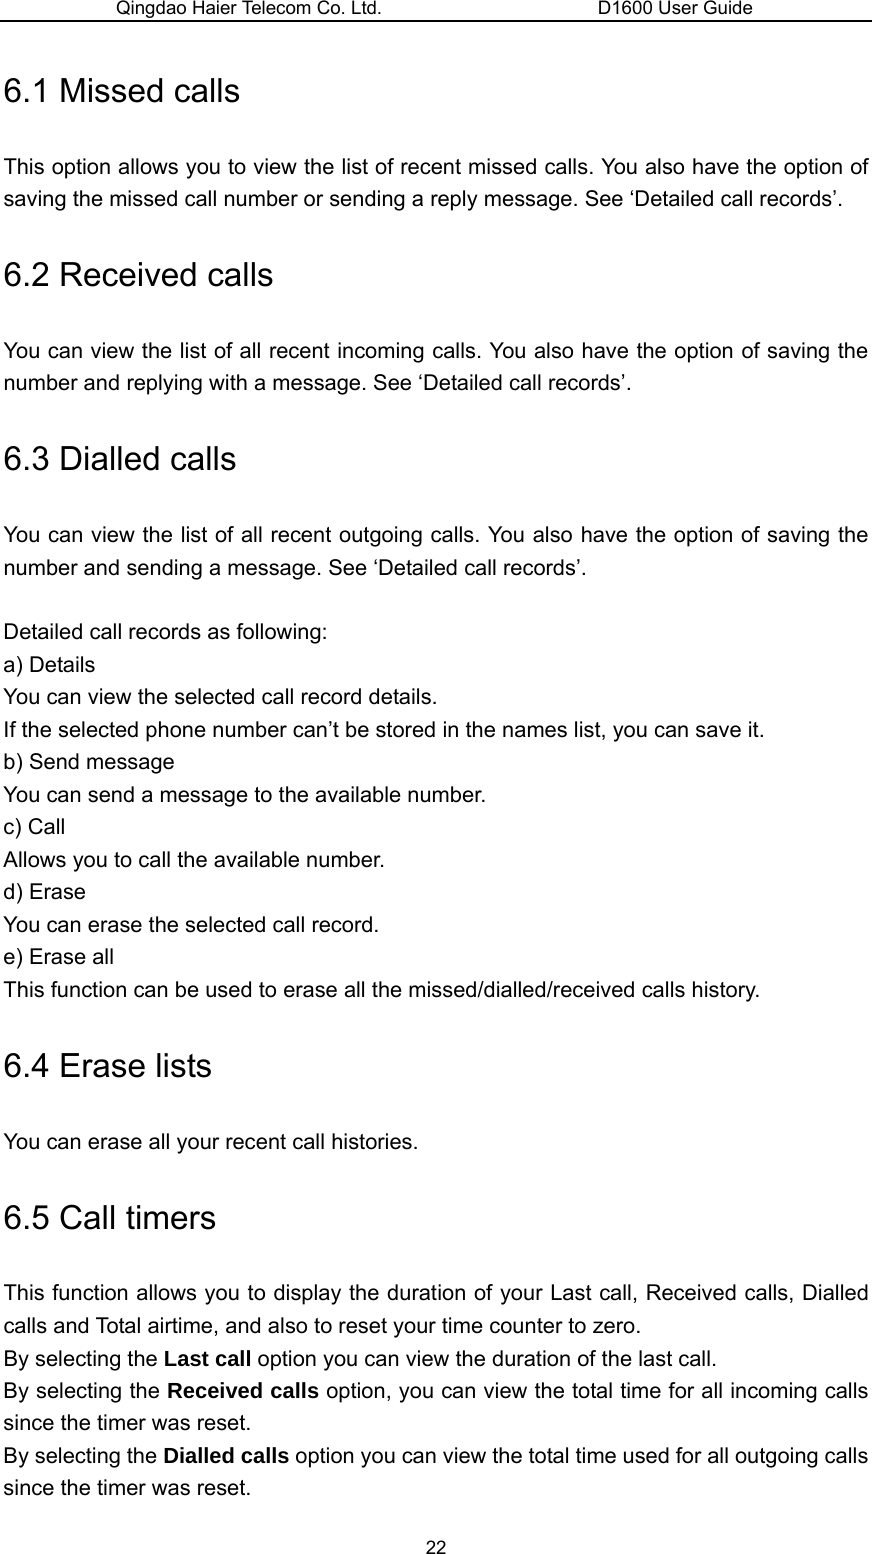 Qingdao Haier Telecom Co. Ltd.                       D1600 User Guide 6.1 Missed calls This option allows you to view the list of recent missed calls. You also have the option of saving the missed call number or sending a reply message. See ‘Detailed call records’. 6.2 Received calls You can view the list of all recent incoming calls. You also have the option of saving the number and replying with a message. See ‘Detailed call records’. 6.3 Dialled calls You can view the list of all recent outgoing calls. You also have the option of saving the number and sending a message. See ‘Detailed call records’.  Detailed call records as following: a) Details   You can view the selected call record details. If the selected phone number can’t be stored in the names list, you can save it. b) Send message You can send a message to the available number. c) Call Allows you to call the available number. d) Erase You can erase the selected call record. e) Erase all This function can be used to erase all the missed/dialled/received calls history. 6.4 Erase lists You can erase all your recent call histories. 6.5 Call timers This function allows you to display the duration of your Last call, Received calls, Dialled calls and Total airtime, and also to reset your time counter to zero. By selecting the Last call option you can view the duration of the last call. By selecting the Received calls option, you can view the total time for all incoming calls since the timer was reset. By selecting the Dialled calls option you can view the total time used for all outgoing calls since the timer was reset. 22 